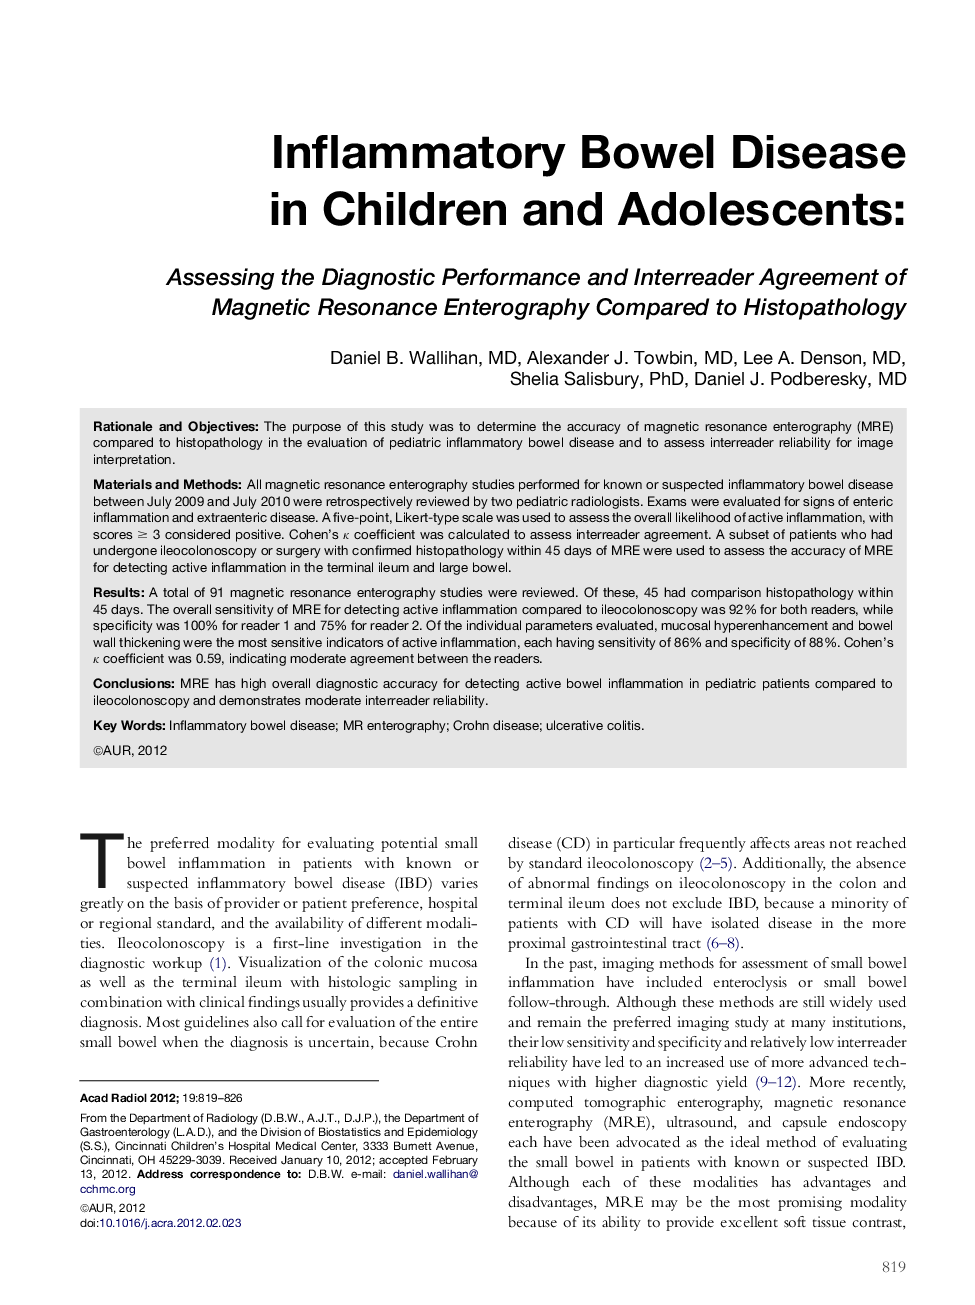 Inflammatory Bowel Disease in Children and Adolescents